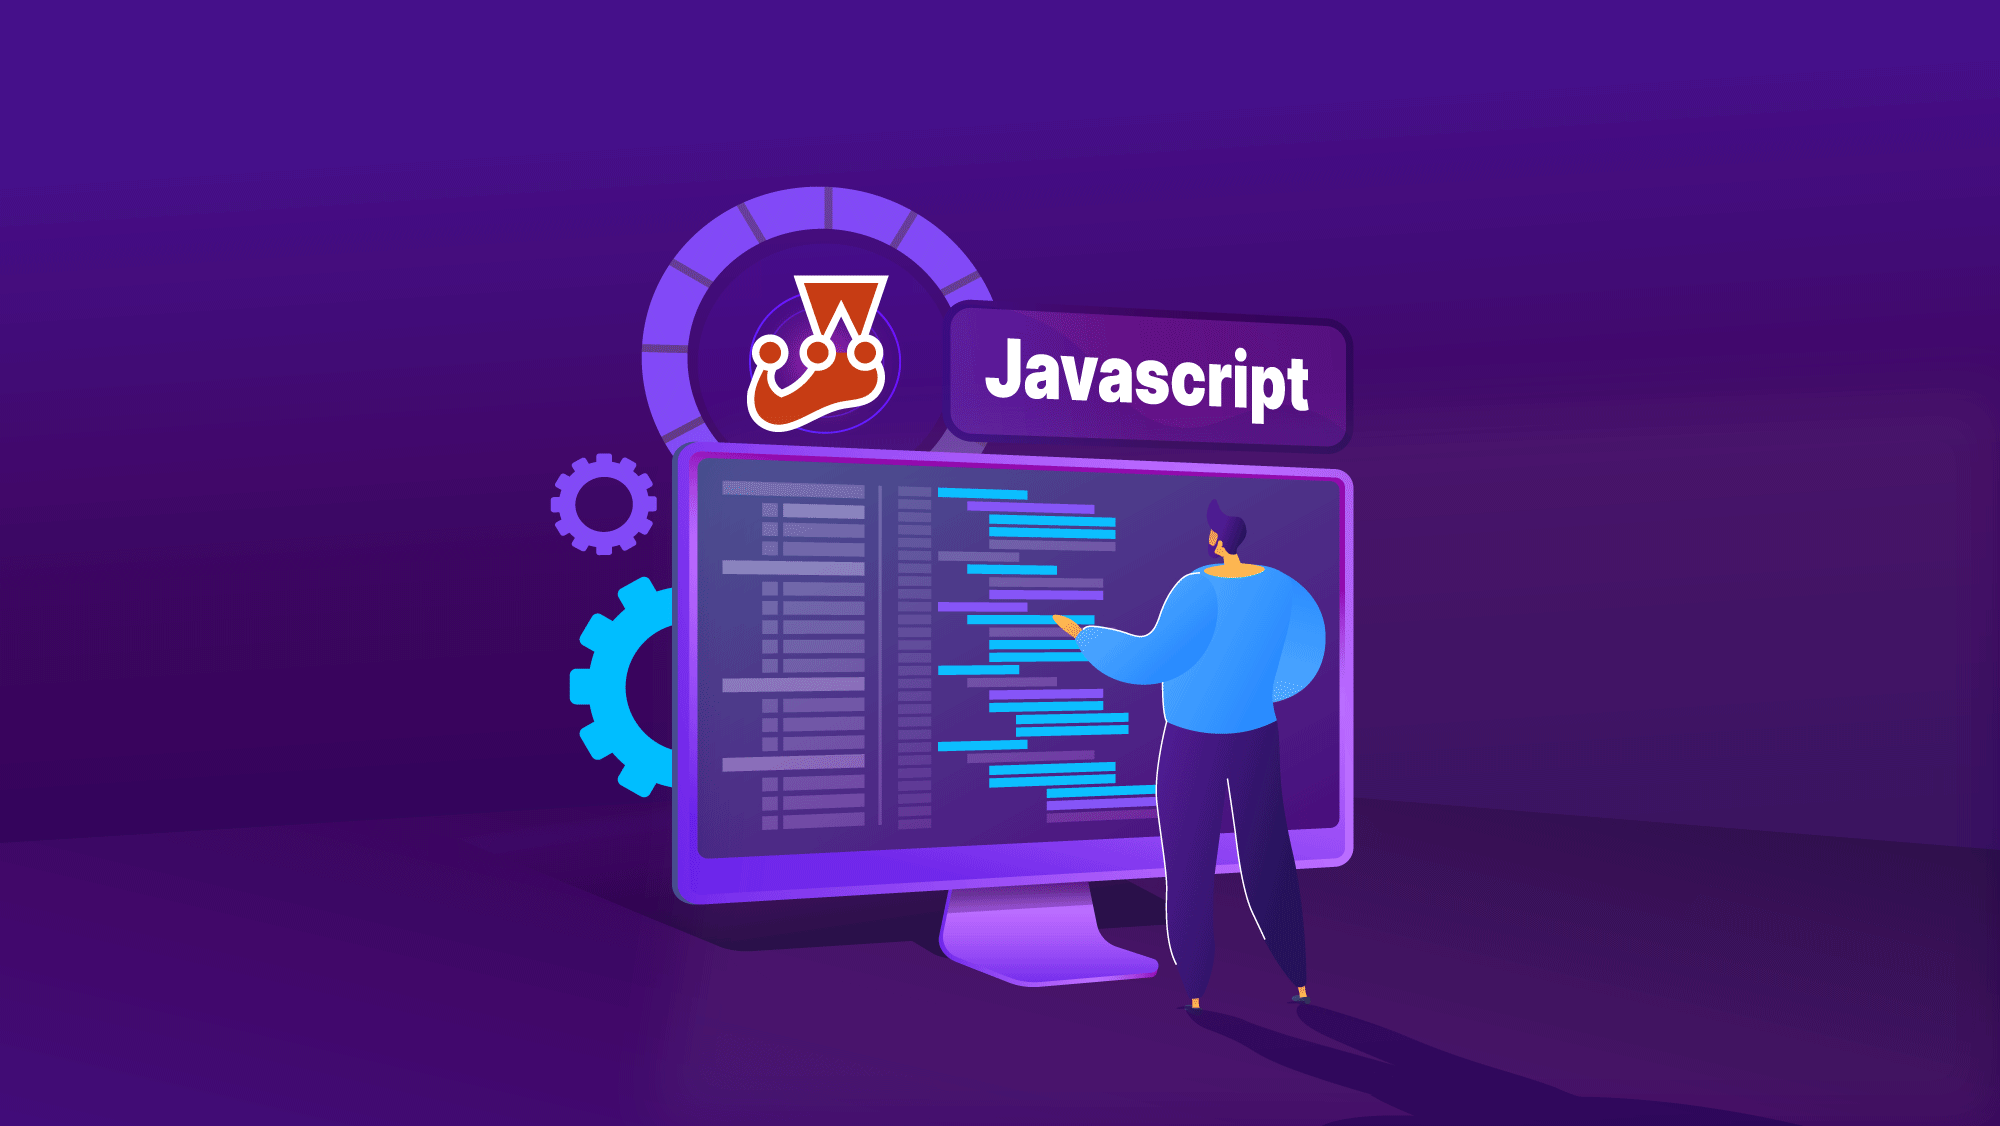 Start Unit Testing Your Javascript with Jest